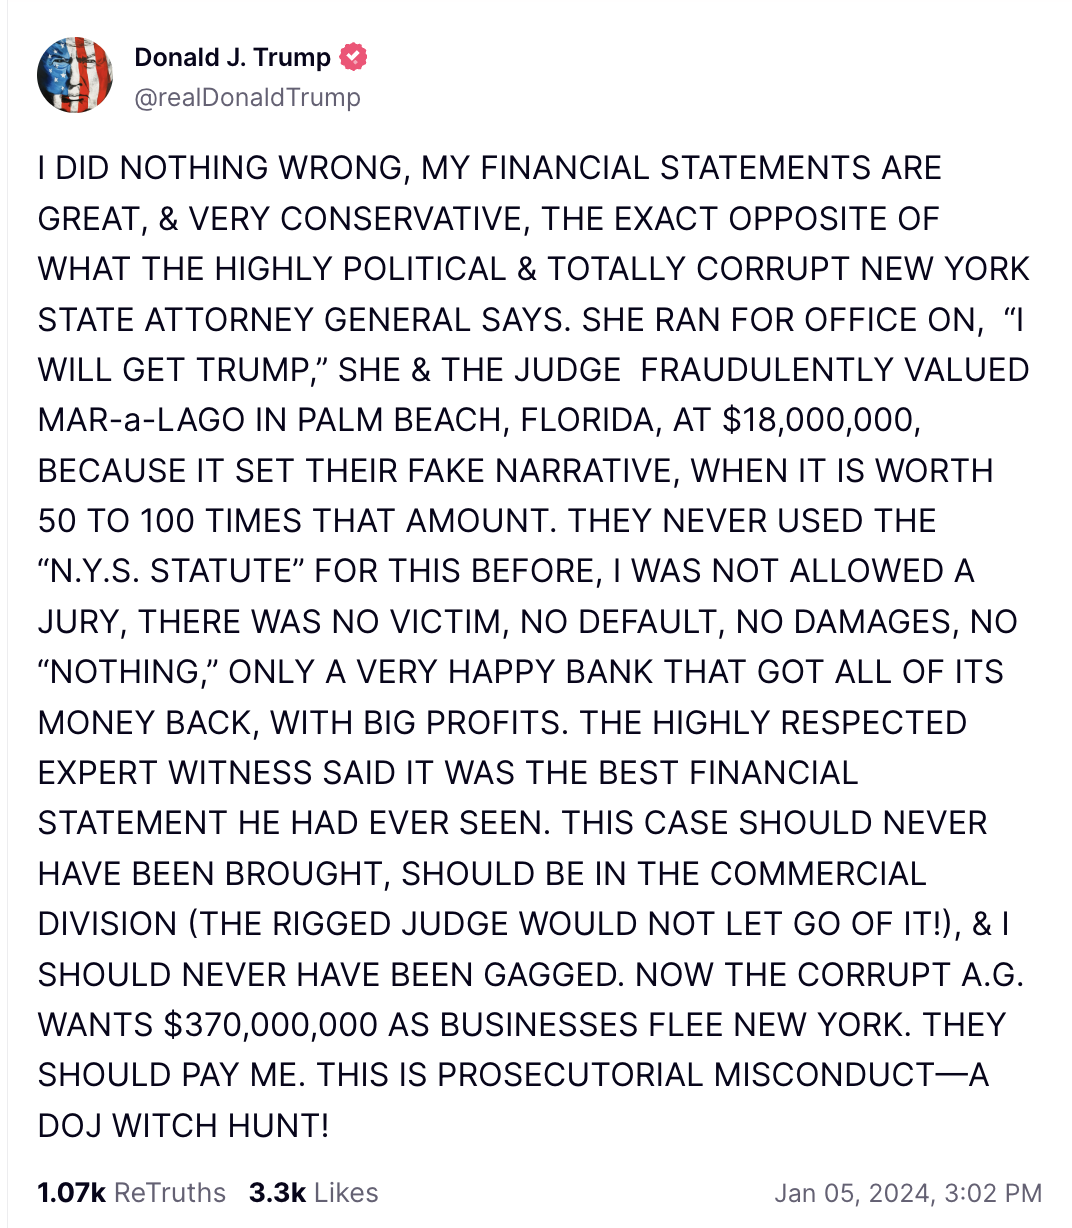 I DID NOTHING WRONG, MY FINANCIAL STATEMENTS ARE GREAT, & VERY CONSERVATIVE, THE EXACT OPPOSITE OF WHAT THE HIGHLY POLITICAL & TOTALLY CORRUPT NEW YORK STATE ATTORNEY GENERAL SAYS. SHE RAN FOR OFFICE ON, “I WILL GET TRUMP,” SHE & THE JUDGE FRAUDULENTLY VALUED MAR-a-LAGO IN PALM BEACH, FLORIDA, AT $18,000,000, BECAUSE IT SET THEIR FAKE NARRATIVE, WHEN IT IS WORTH 50 TO 100 TIMES THAT AMOUNT. THEY NEVER USED THE “N.Y.S. STATUTE” FOR THIS BEFORE, I WAS NOT ALLOWED A JURY, THERE WAS NO VICTIM, NO DEFAULT, NO DAMAGES, NO “NOTHING,” ONLY A VERY HAPPY BANK THAT GOT ALL OF ITS MONEY BACK, WITH BIG PROFITS. THE HIGHLY RESPECTED EXPERT WITNESS SAID IT WAS THE BEST FINANCIAL STATEMENT HE HAD EVER SEEN. THIS CASE SHOULD NEVER HAVE BEEN BROUGHT, SHOULD BE IN THE COMMERCIAL DIVISION (THE RIGGED JUDGE WOULD NOT LET GO OF IT!), & I SHOULD NEVER HAVE BEEN GAGGED. NOW THE CORRUPT A.G. WANTS $370,000,000 AS BUSINESSES FLEE NEW YORK. THEY SHOULD PAY ME. THIS IS PROSECUTORIAL MISCONDUCT—A DOJ WITCH HUNT!